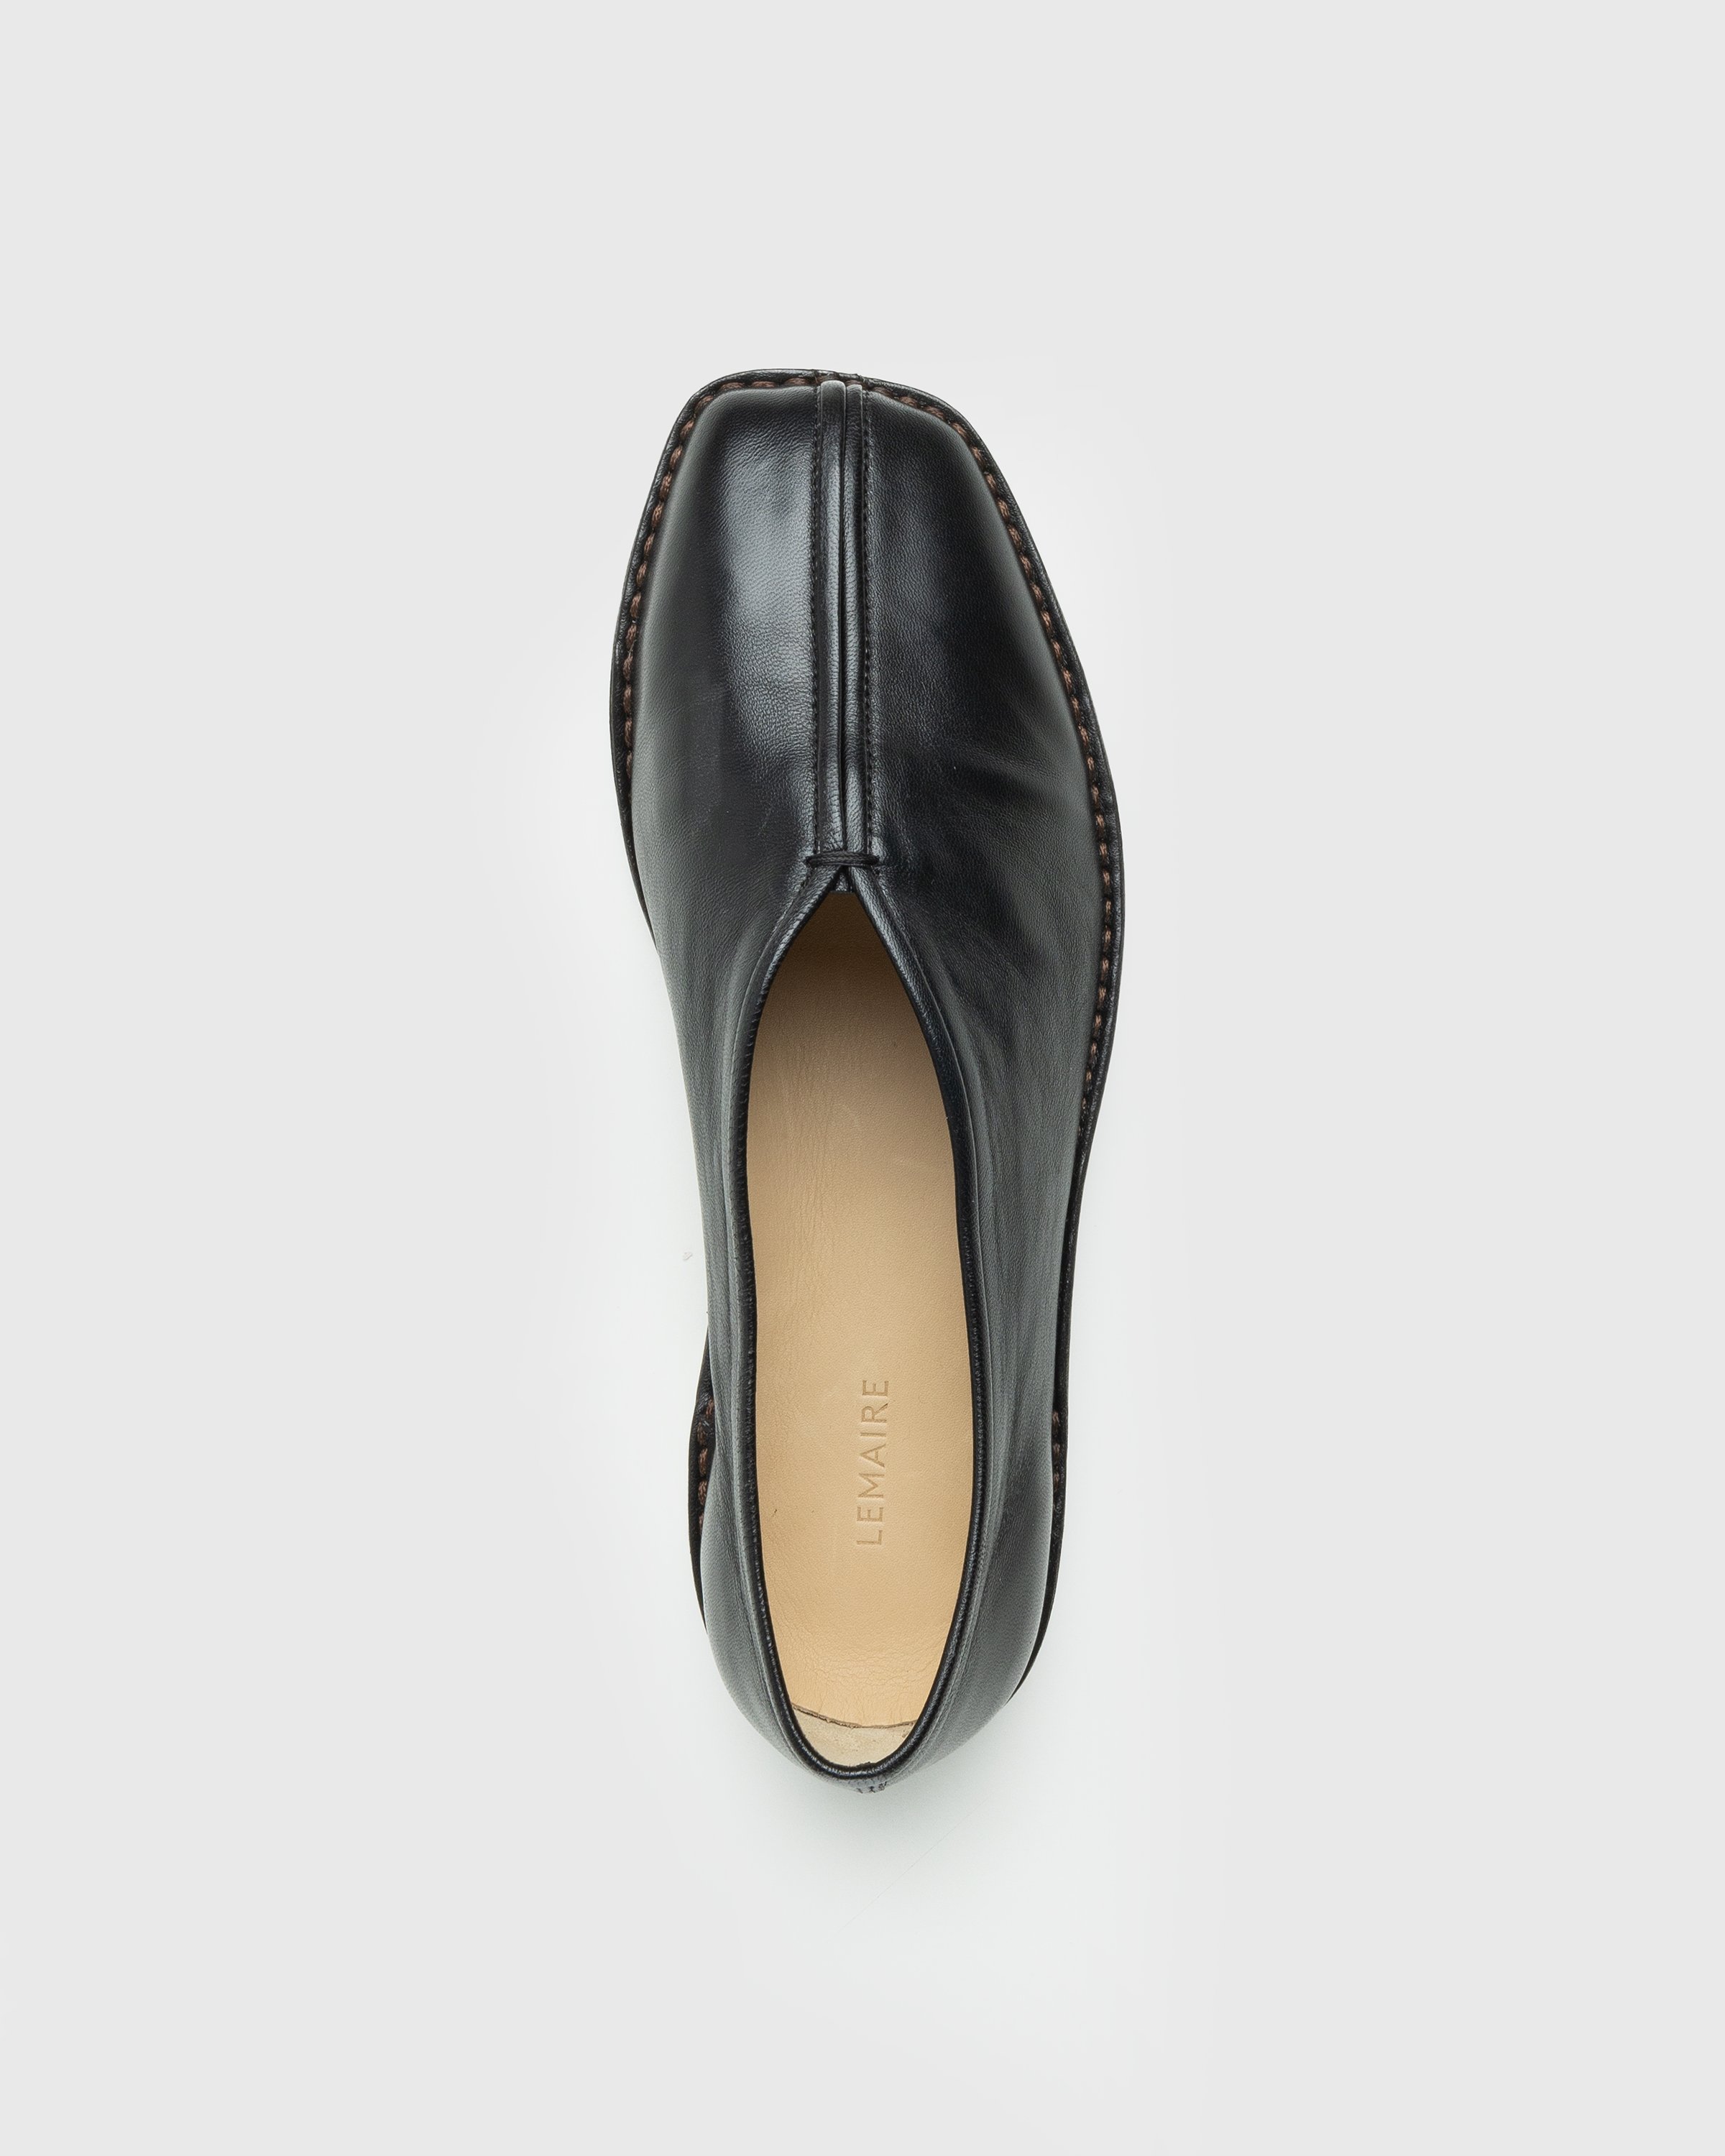 Lemaire - Flat Piped Slippers - Footwear - Black - Image 5